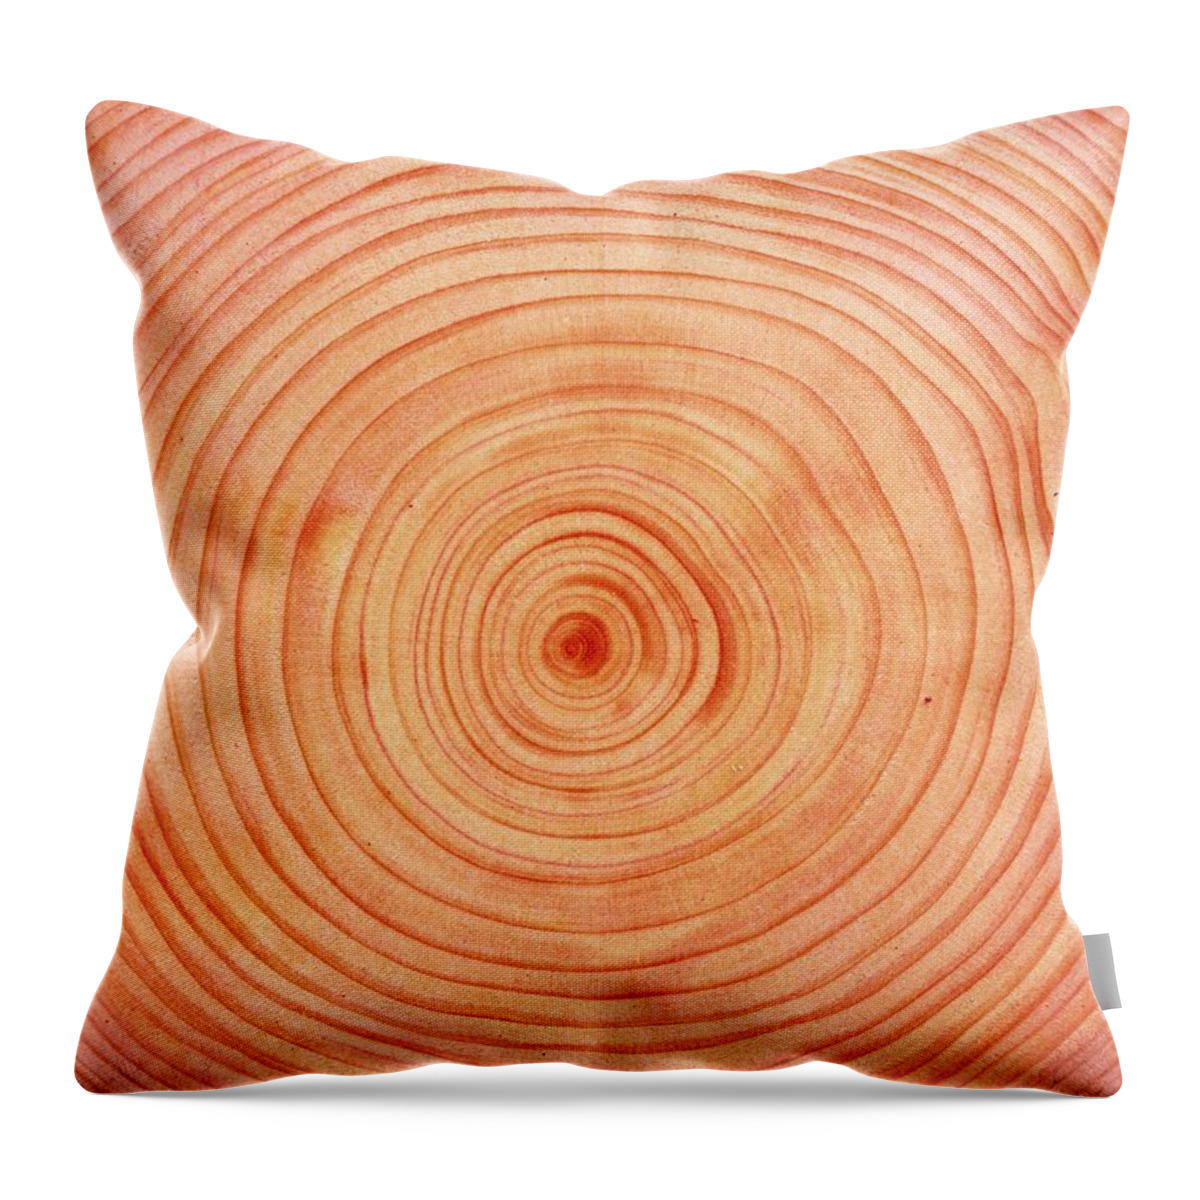 Wood Throw Pillow featuring the photograph Photography Of Annual Rings Of Japanese by Daj